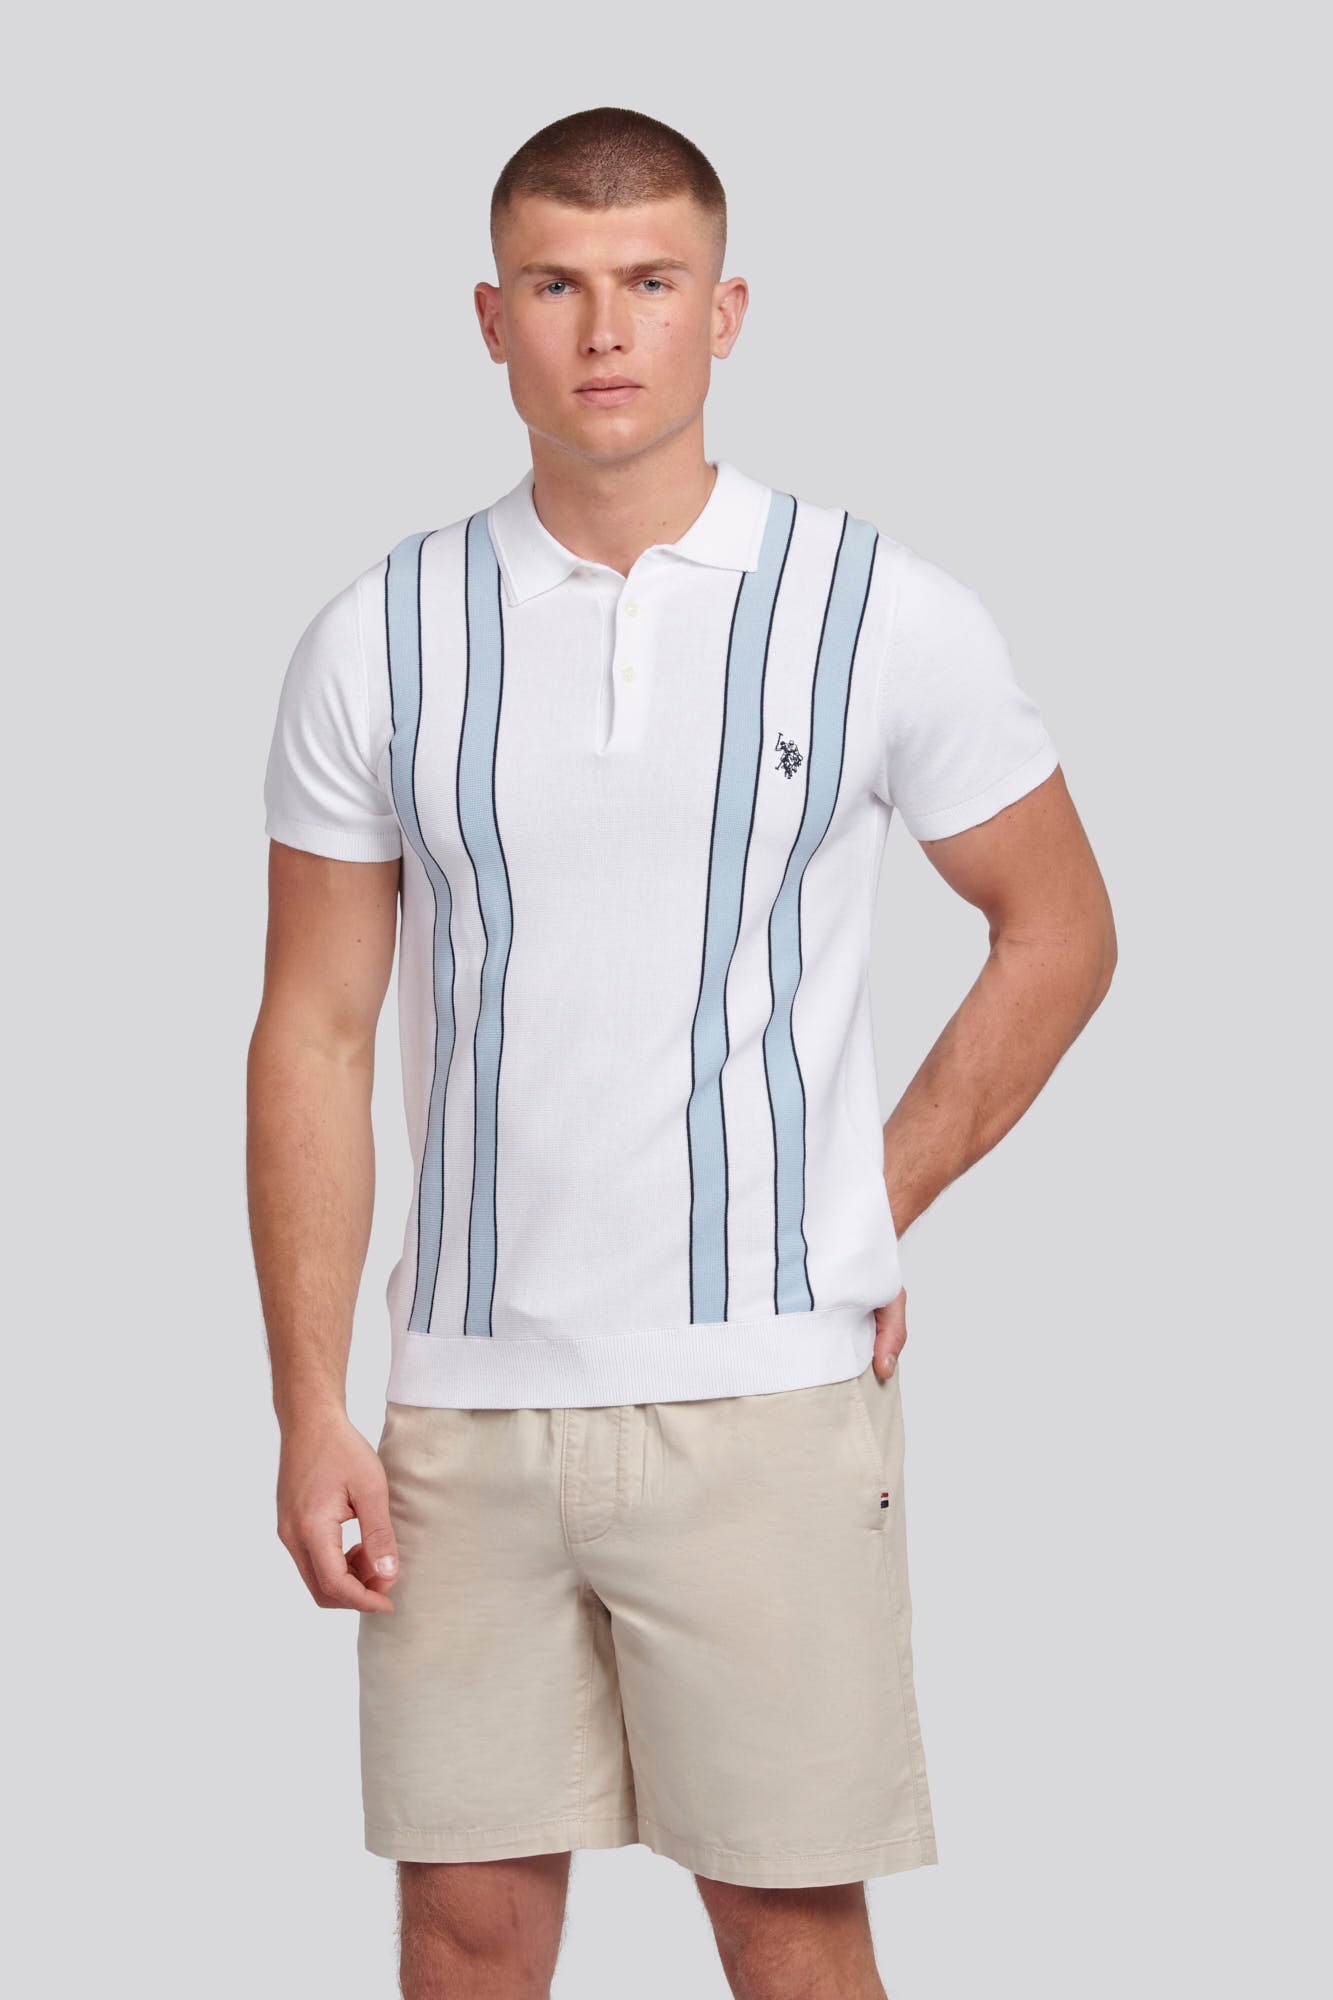 U.S. Polo Assn. Mens Regular Fit Vertical Stripe Knit Polo Shirt in Bright White